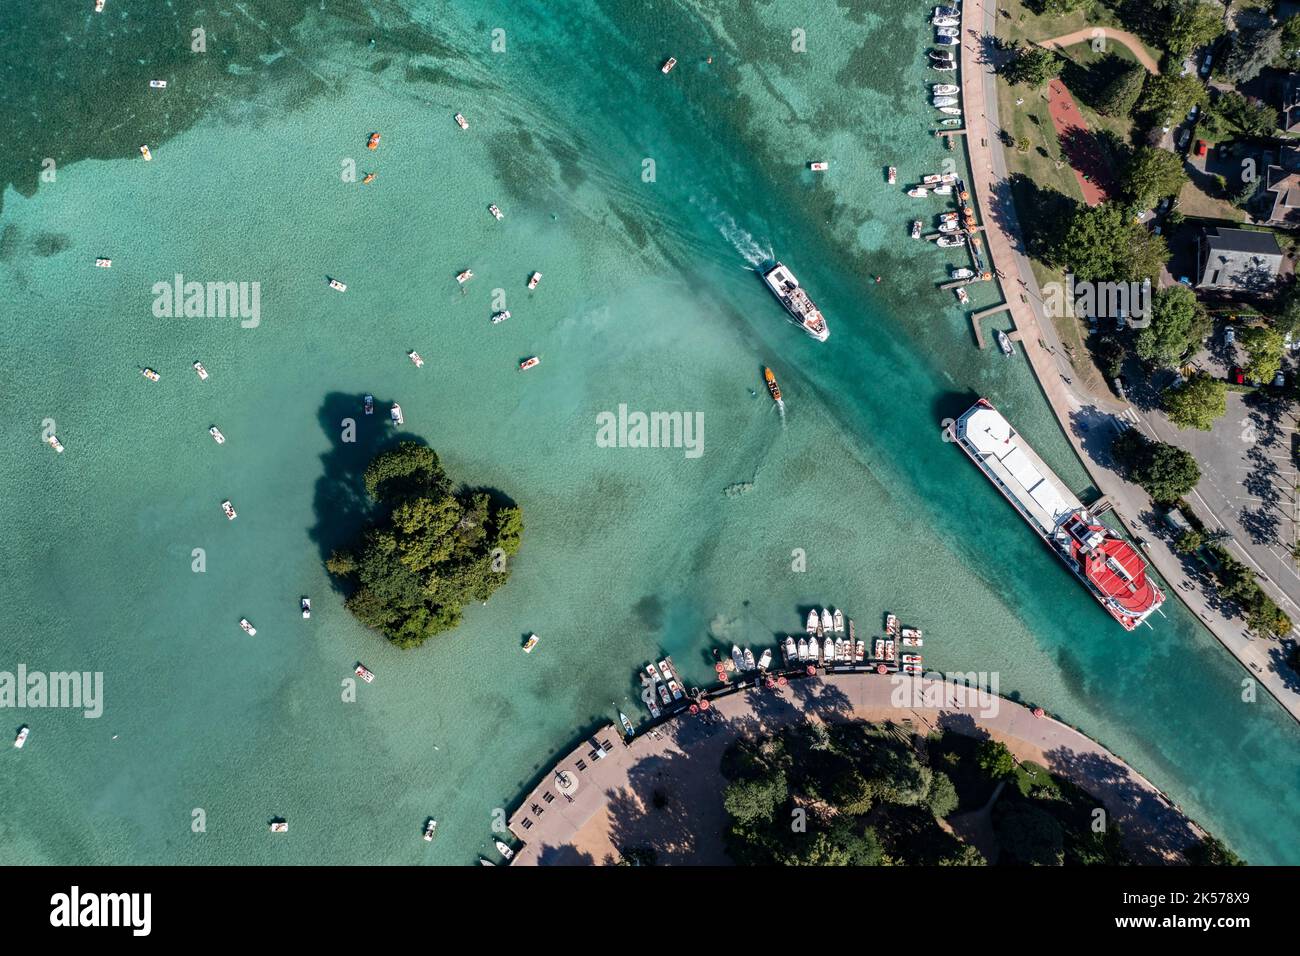 France, Haute-Savoie (74), Annecy, (aerial view) the Ile aux Cygnes and the entrance of the legendary boat 'Libellule' in the Thiou canal Stock Photo